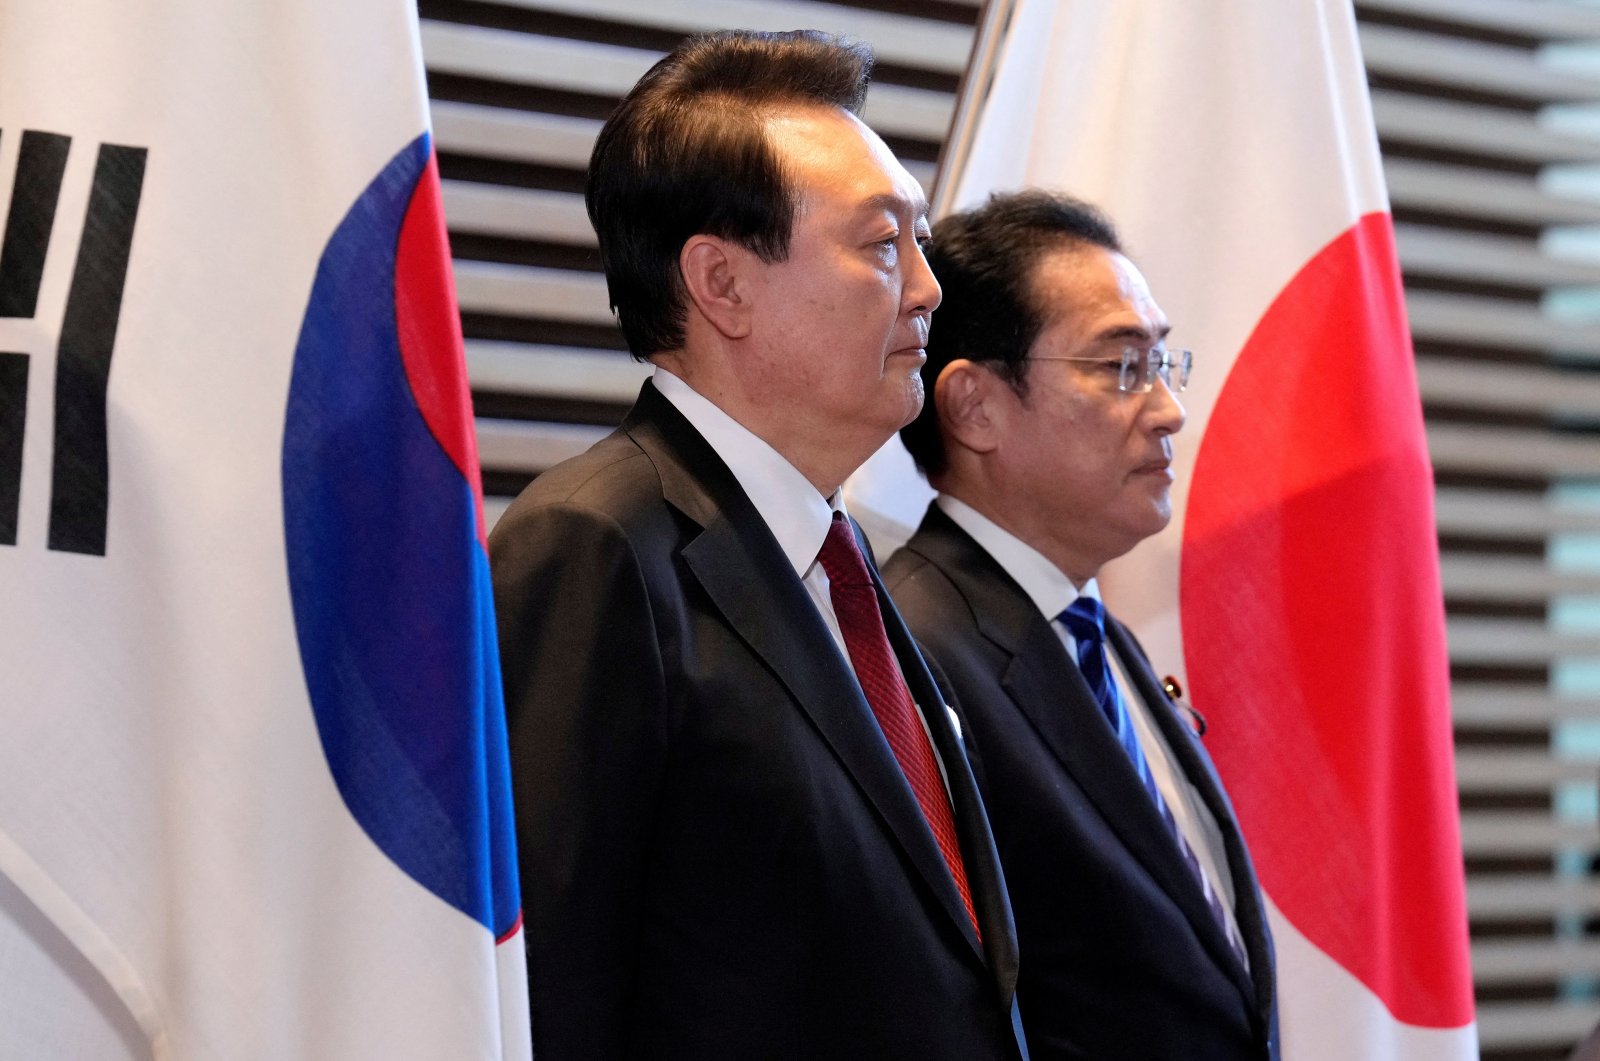 South Korean President Yoon Suk Yeol (L) and Japanese Prime Minister Fumio Kishida attend an honor guard ceremony, Tokyo, Japan, March 16, 2023. (Reuters Photo)